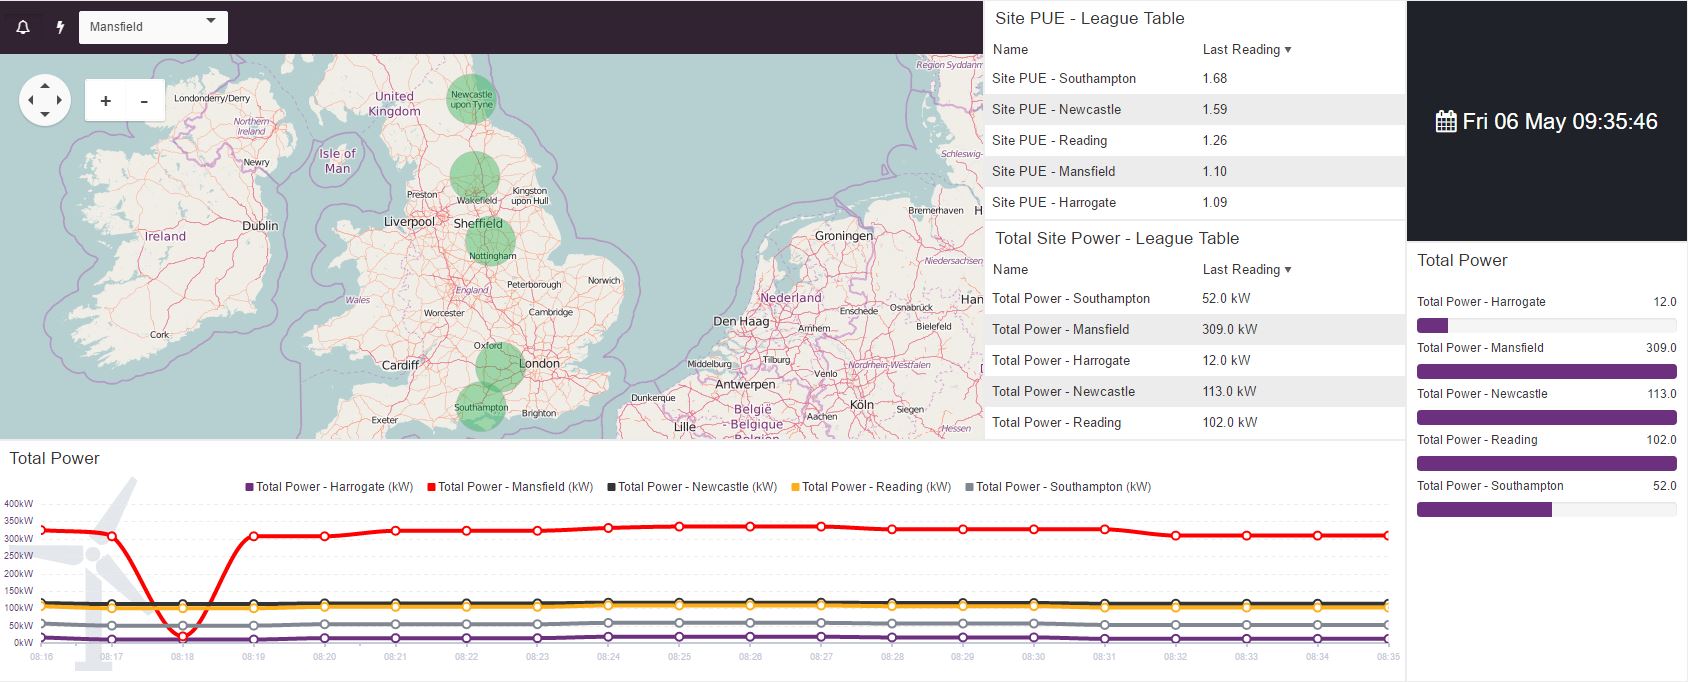 SMARTset-site locations displayed on the map widget. Site league tables for PUE and total power